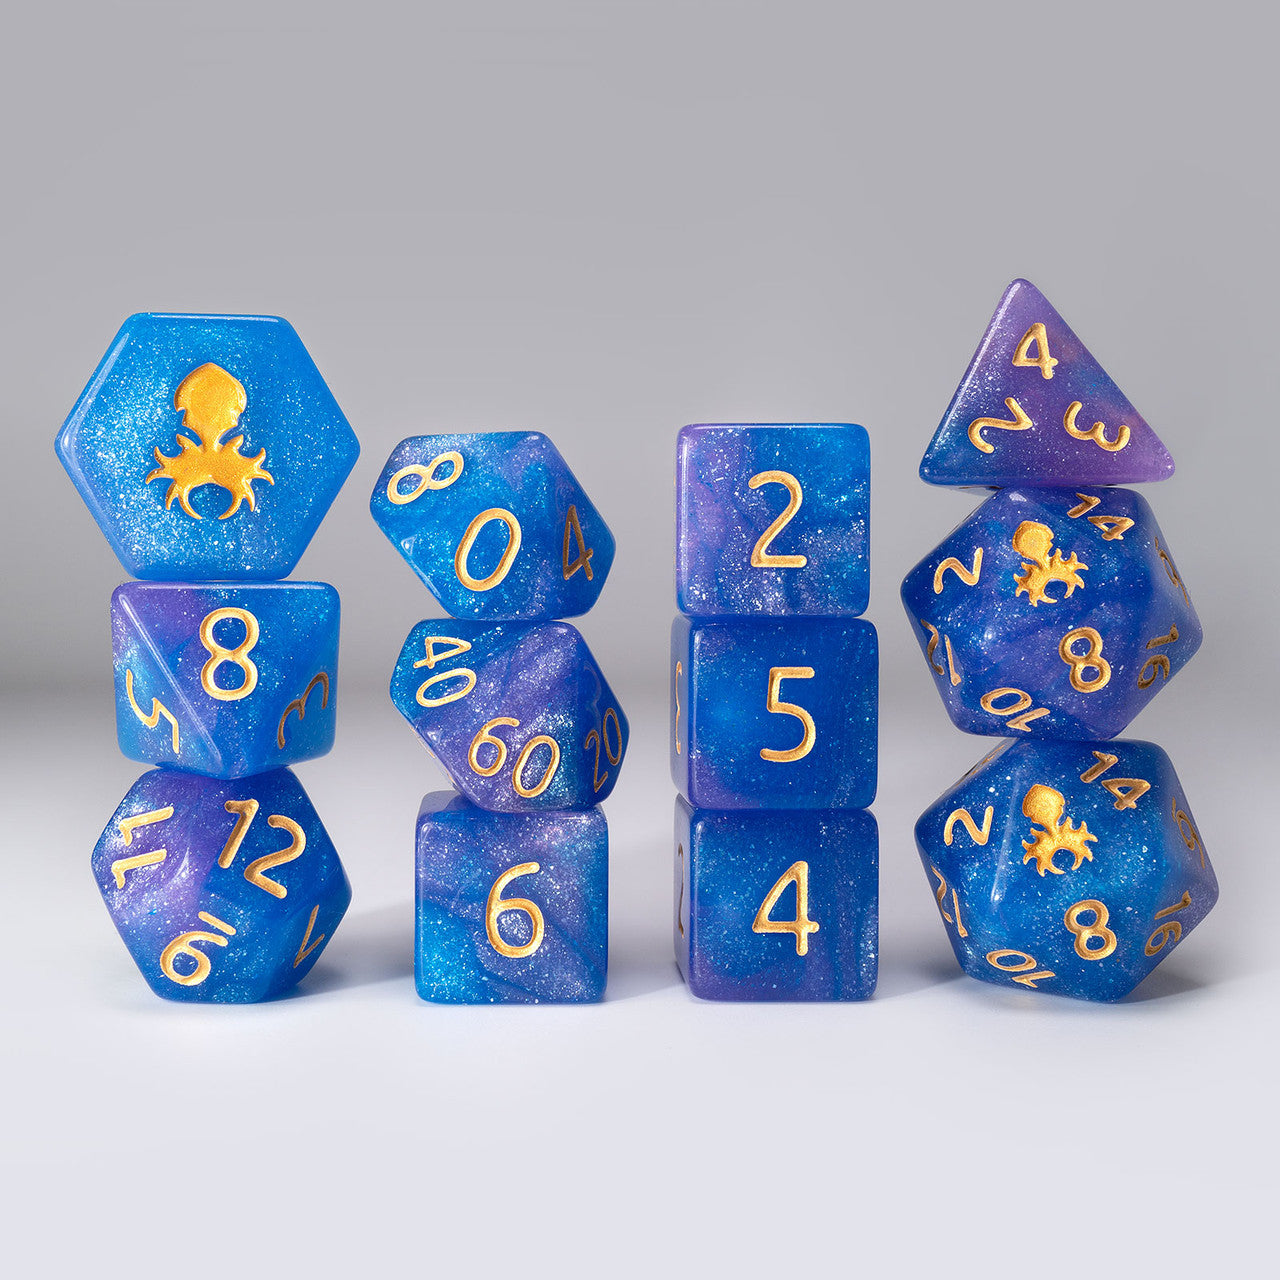 Sky Bridle 12pc Glimmer RPG Dice Set with Gold Ink